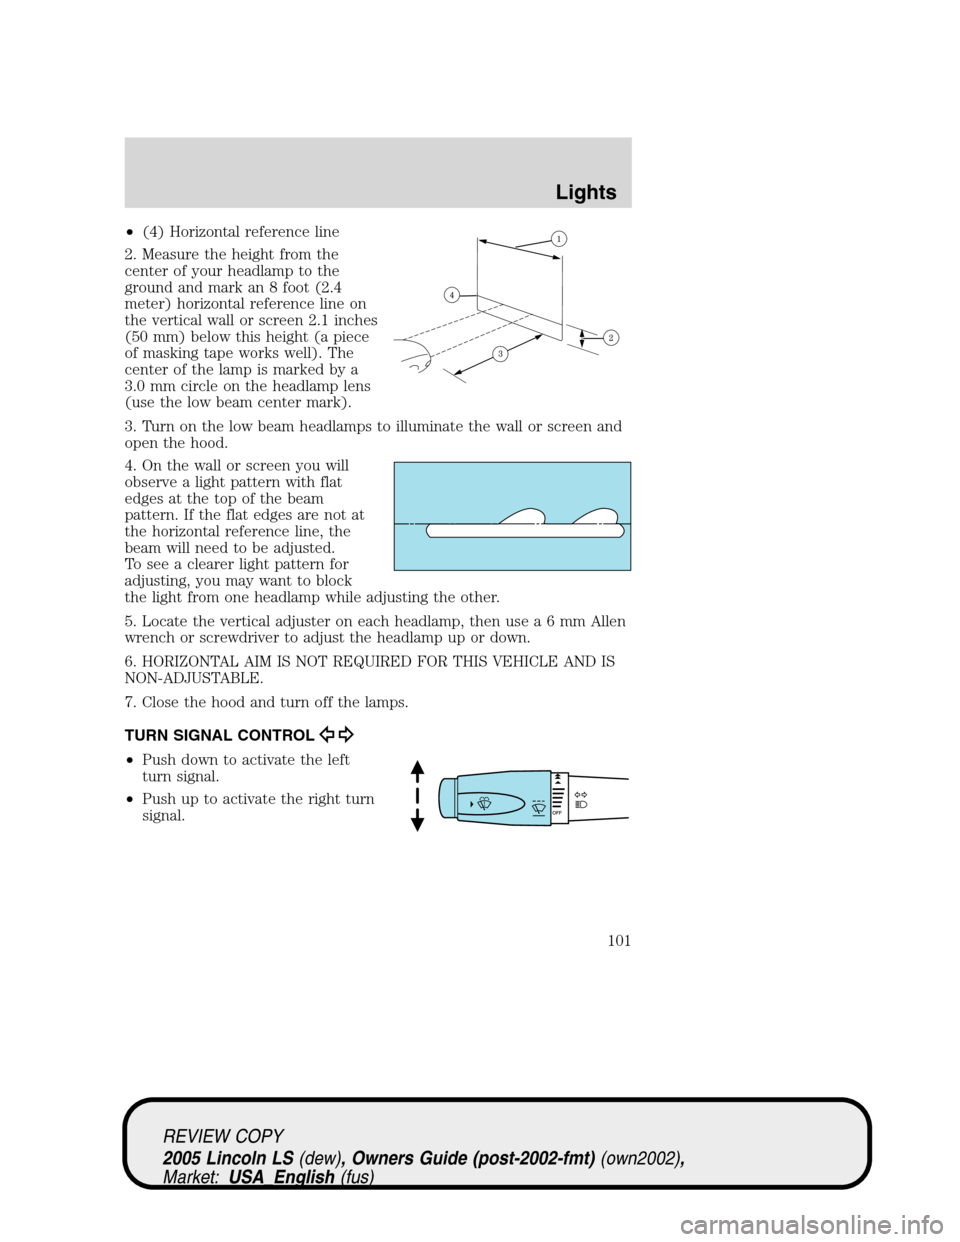 LINCOLN LS 2005 User Guide •(4) Horizontal reference line
2. Measure the height from the
center of your headlamp to the
ground and mark an 8 foot (2.4
meter) horizontal reference line on
the vertical wall or screen 2.1 inches